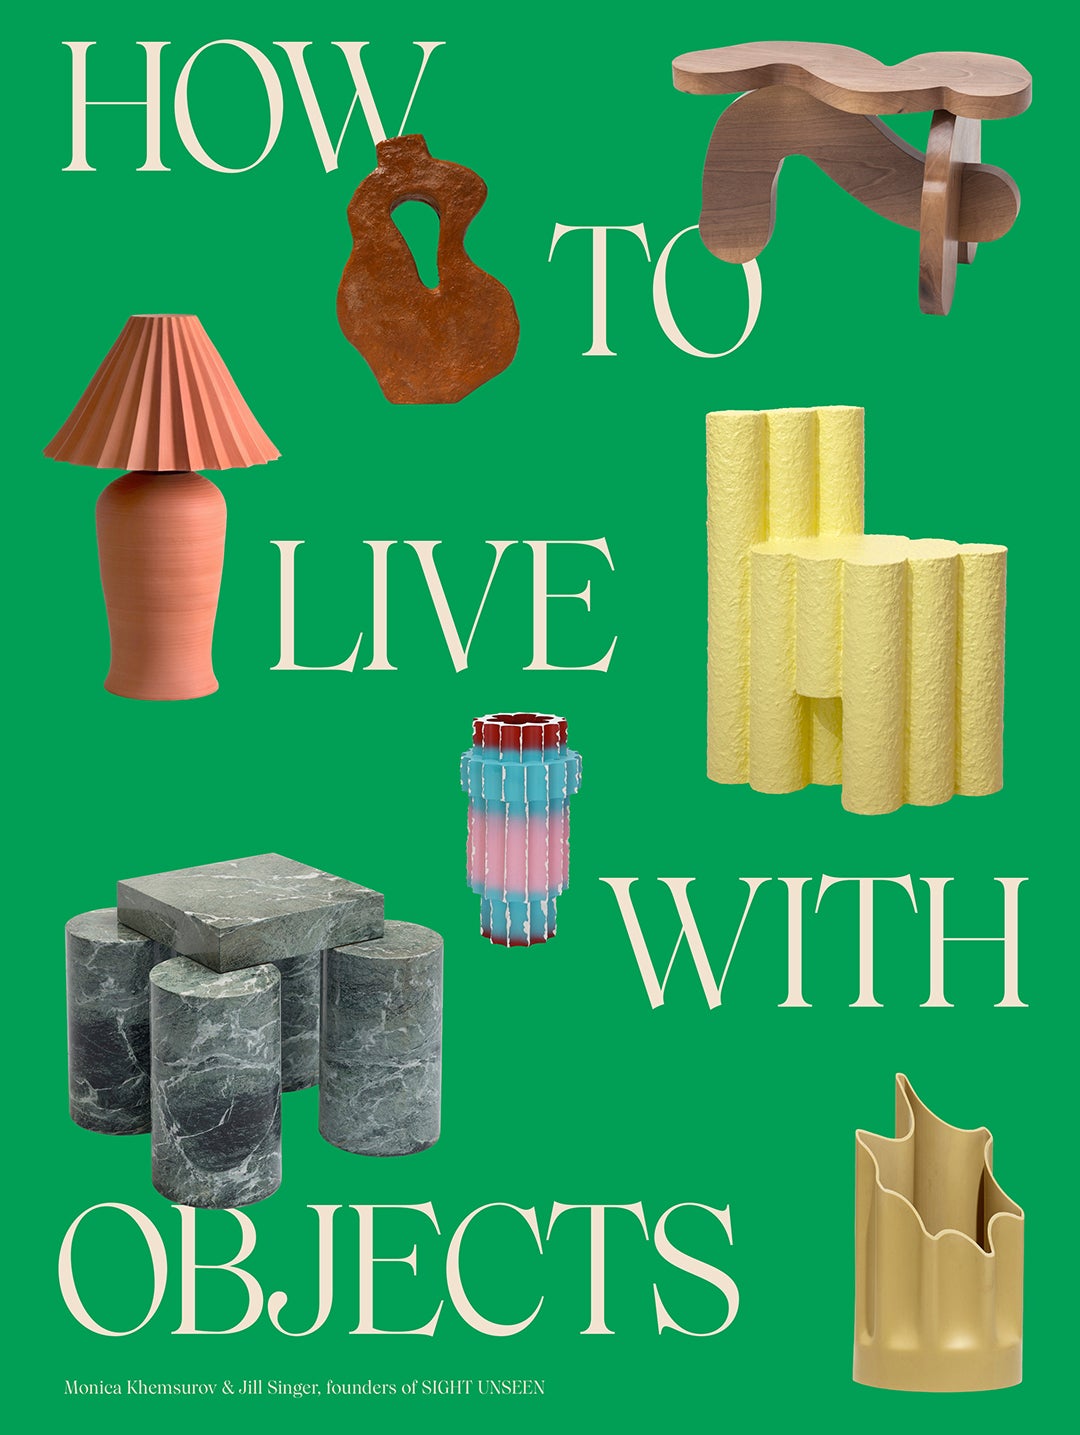 Book with green cover that reads, "How to Live With Objects"